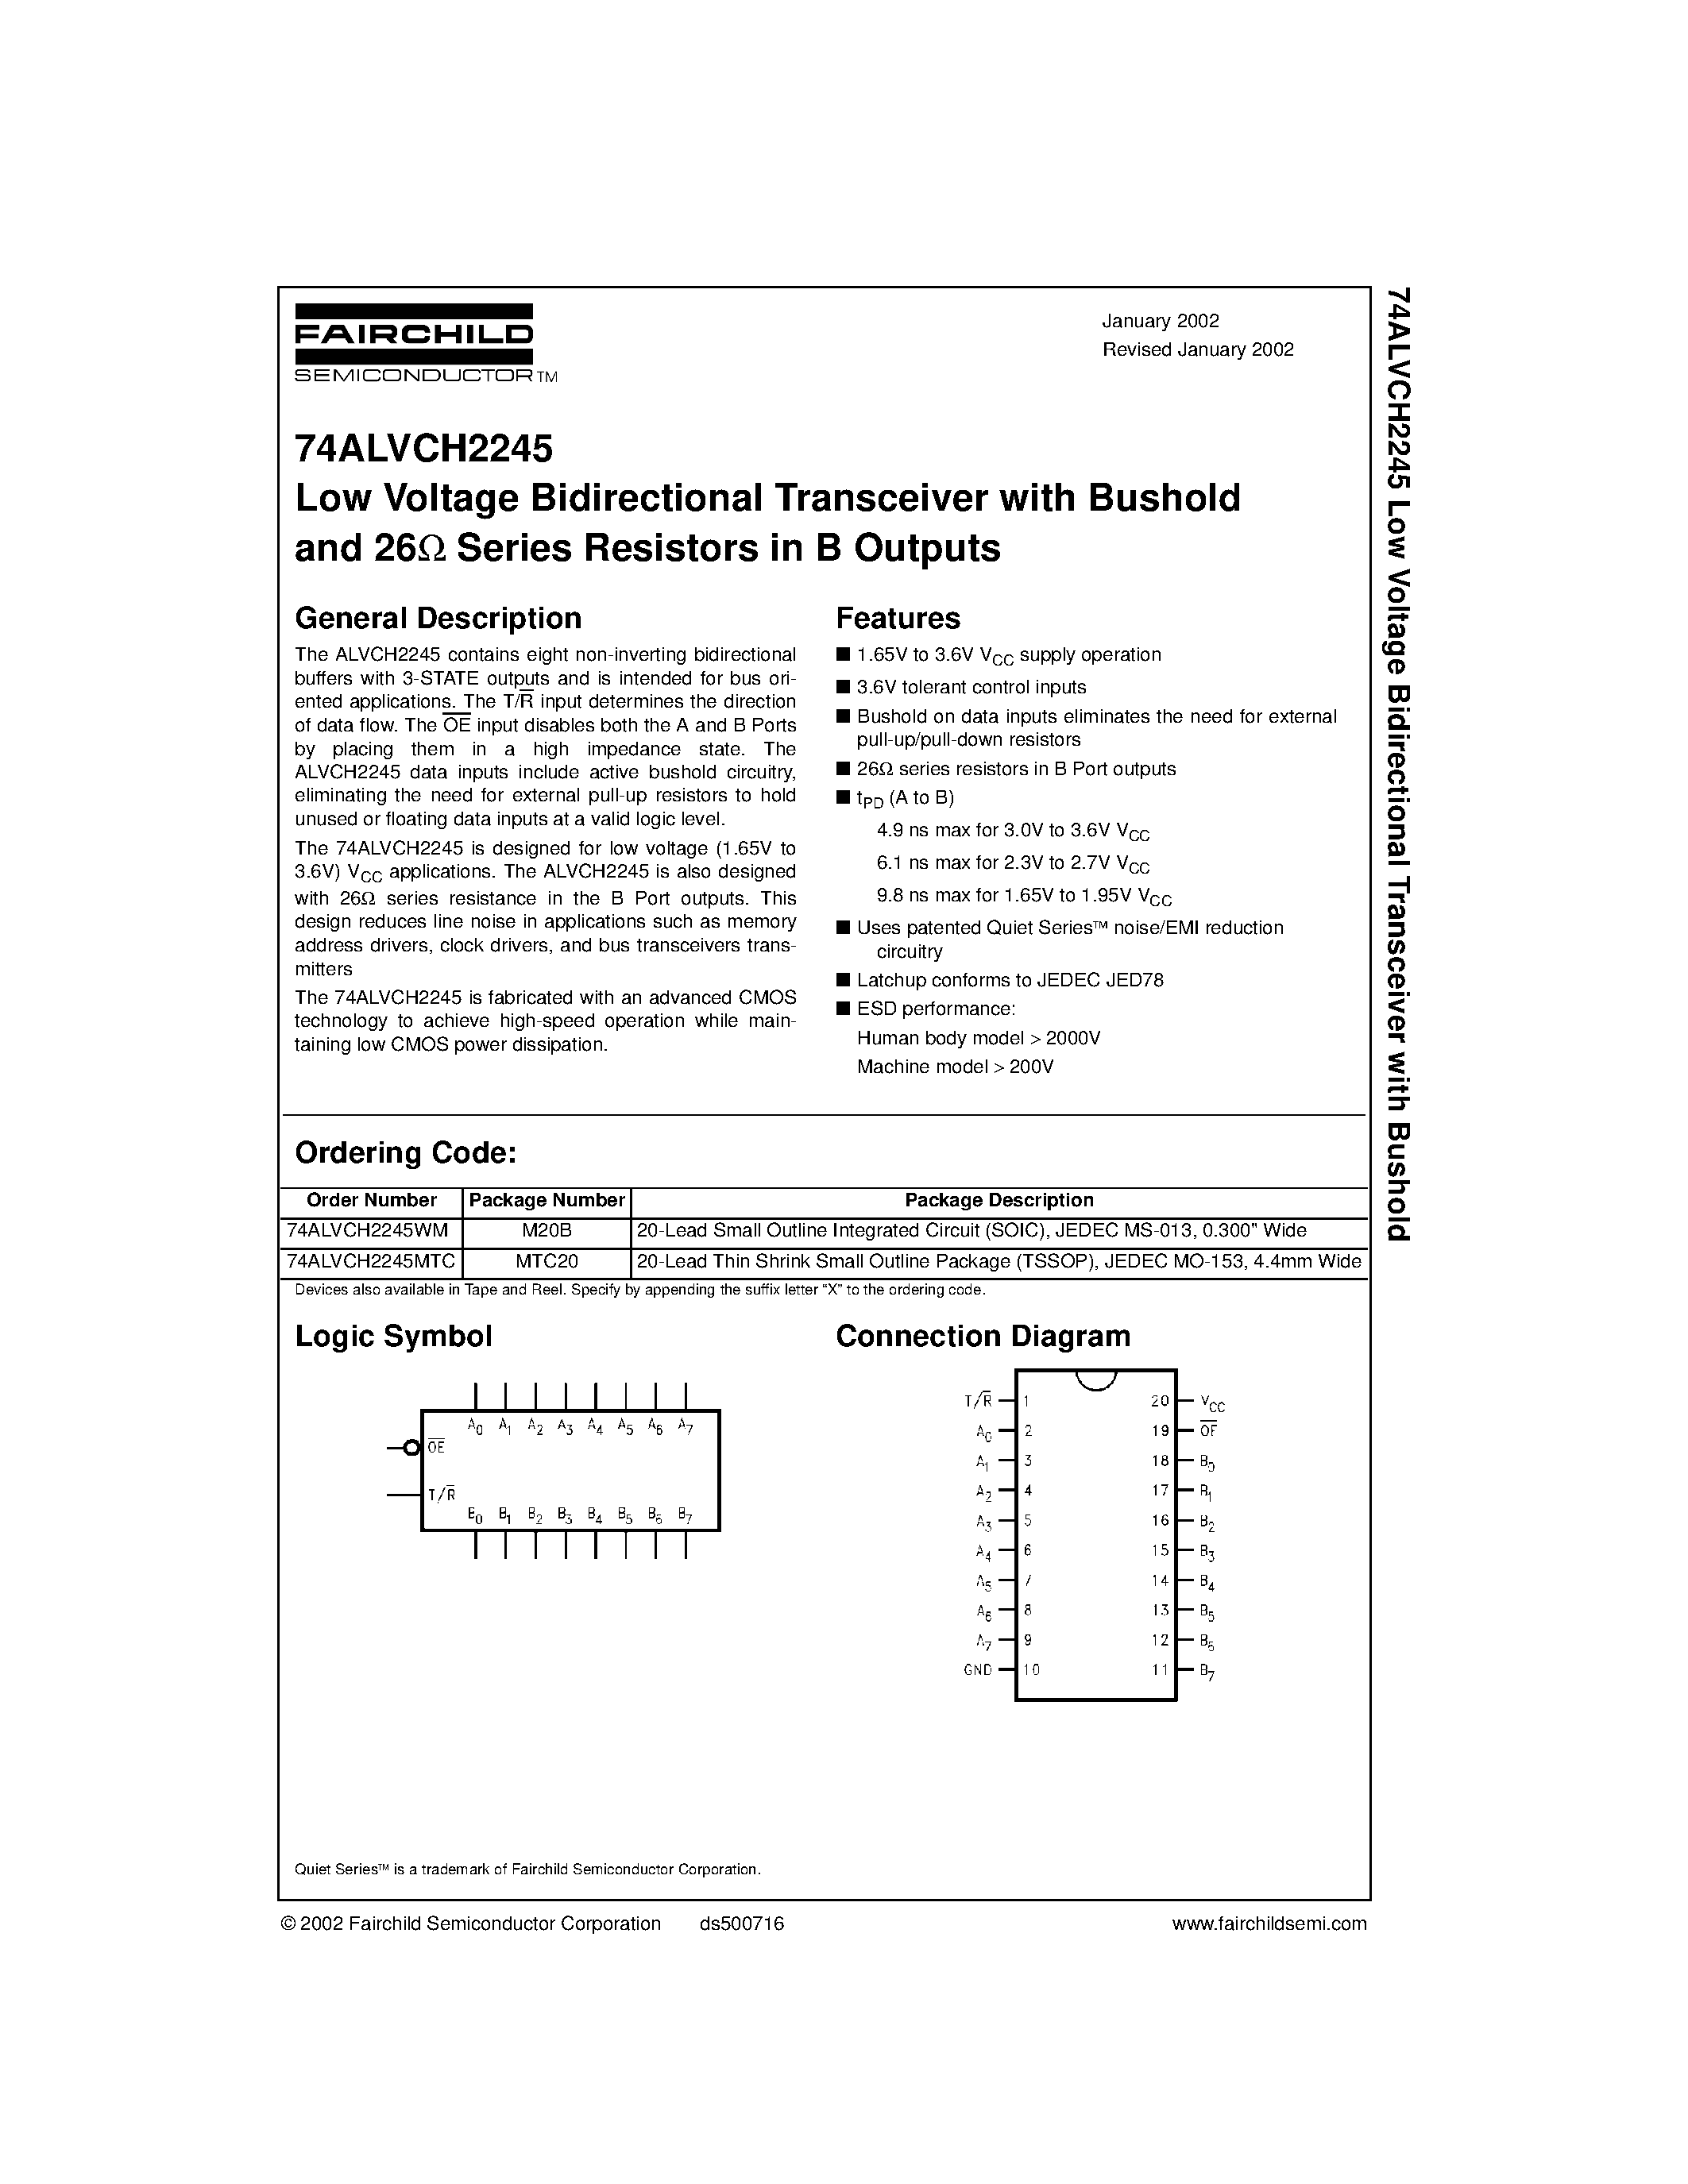 Datasheet 74ALVCH2245MTC - Low Voltage Bidirectional Transceiver with Bushold and 26 Series Resistors in B Outputs page 1